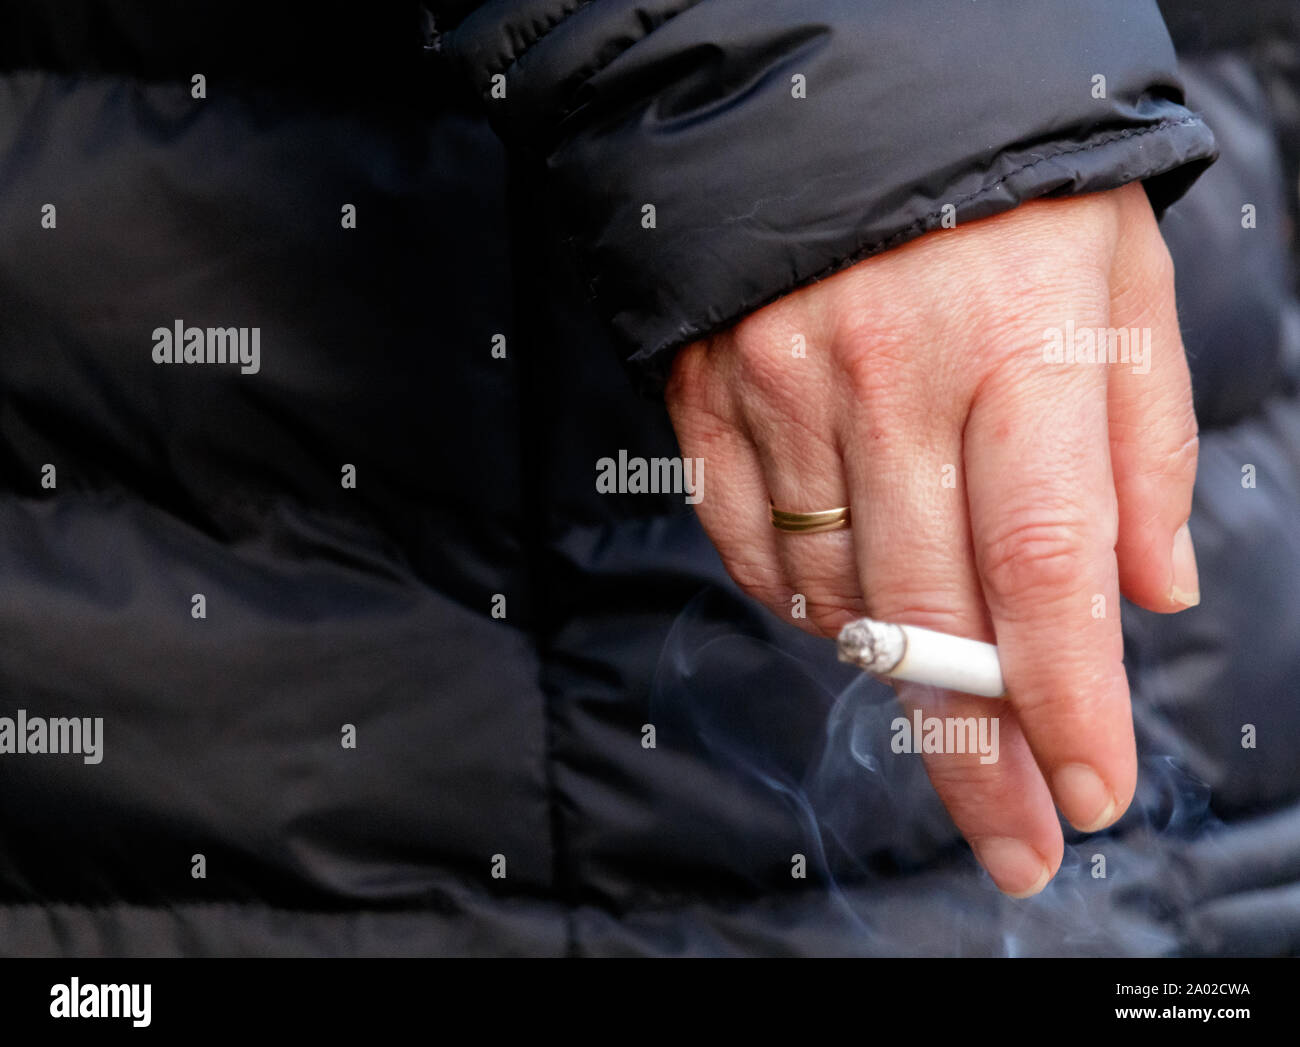 Cambre / Spain - April 19 2019: Hand of a woman holding a cigarette on the street in Spain Stock Photo